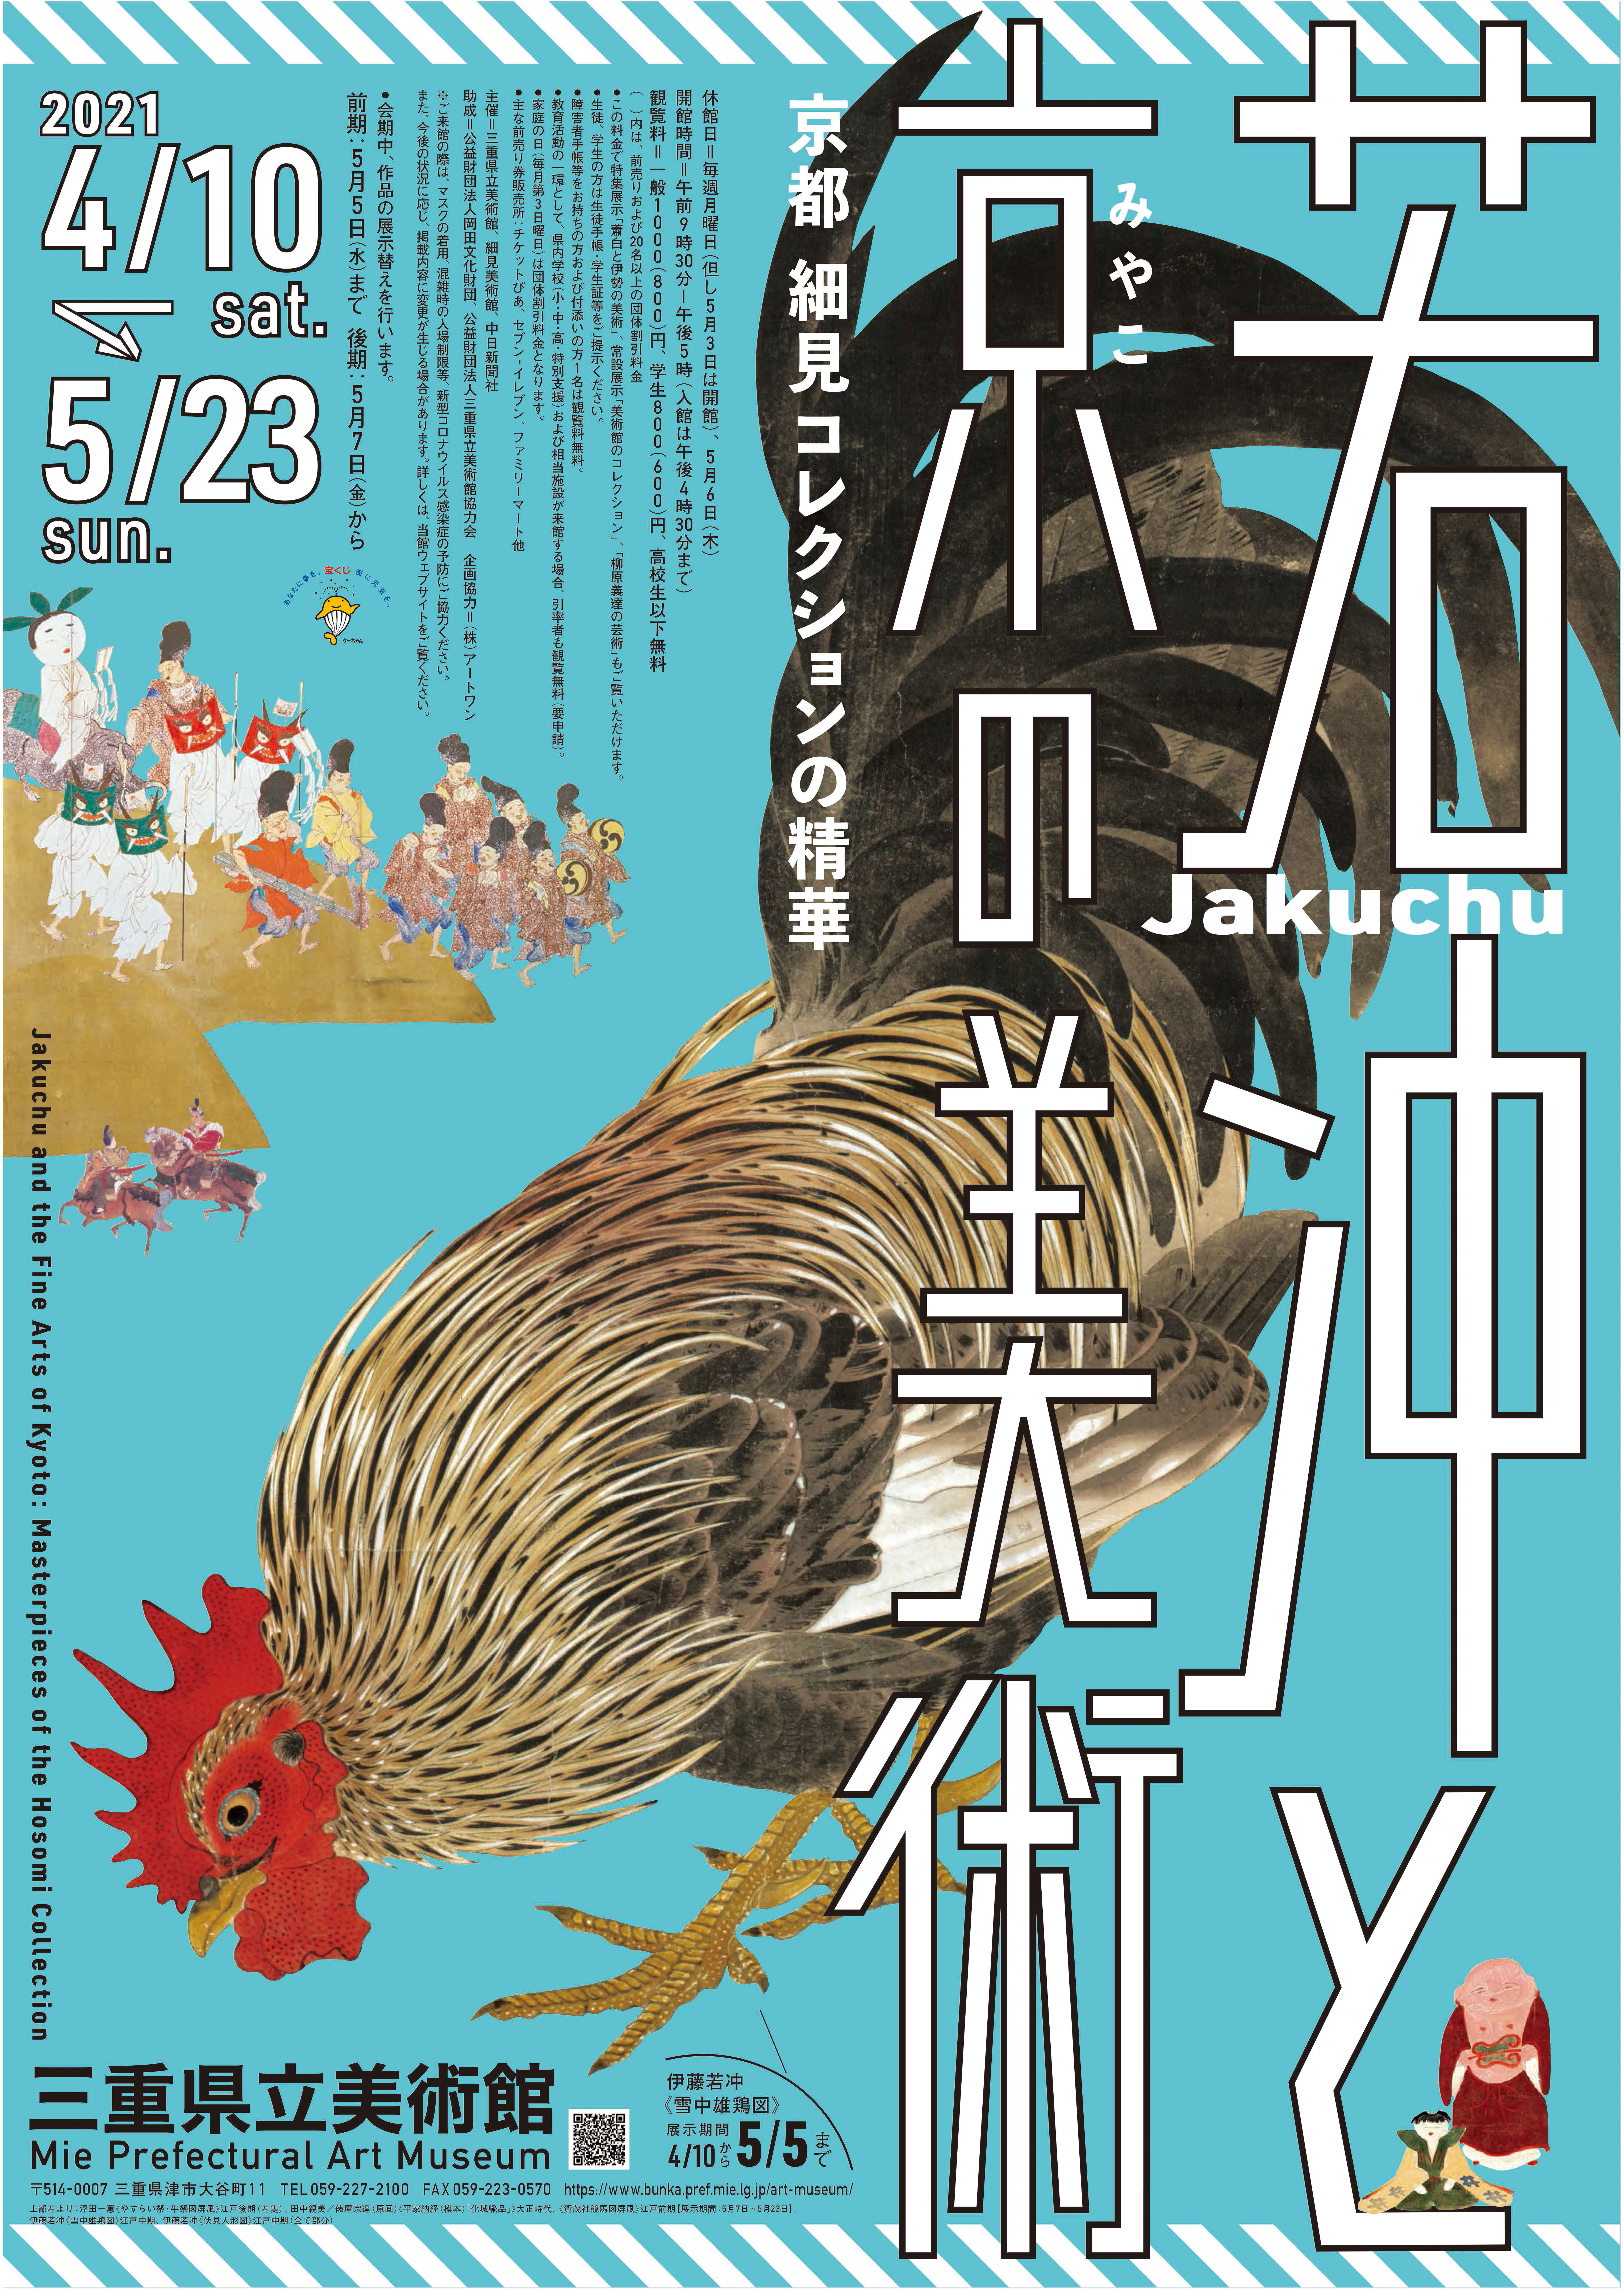 Jakuchu and the Fine Arts of Kyoto: Masterpieces of the Hosomi Collection